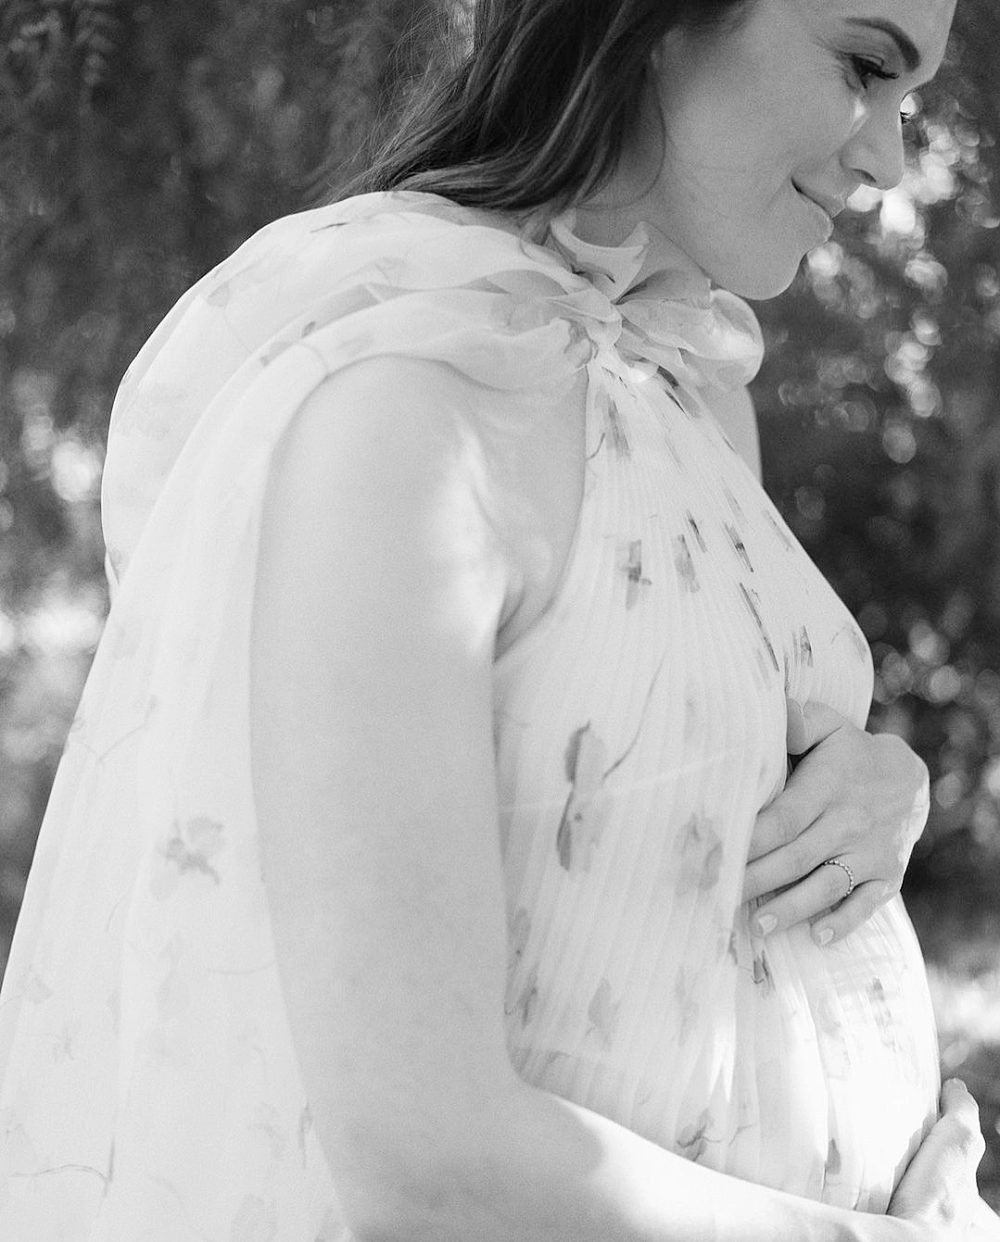 Pregnant Mandy Moore Shows Baby Bump in Gorgeous Maternity Shoot